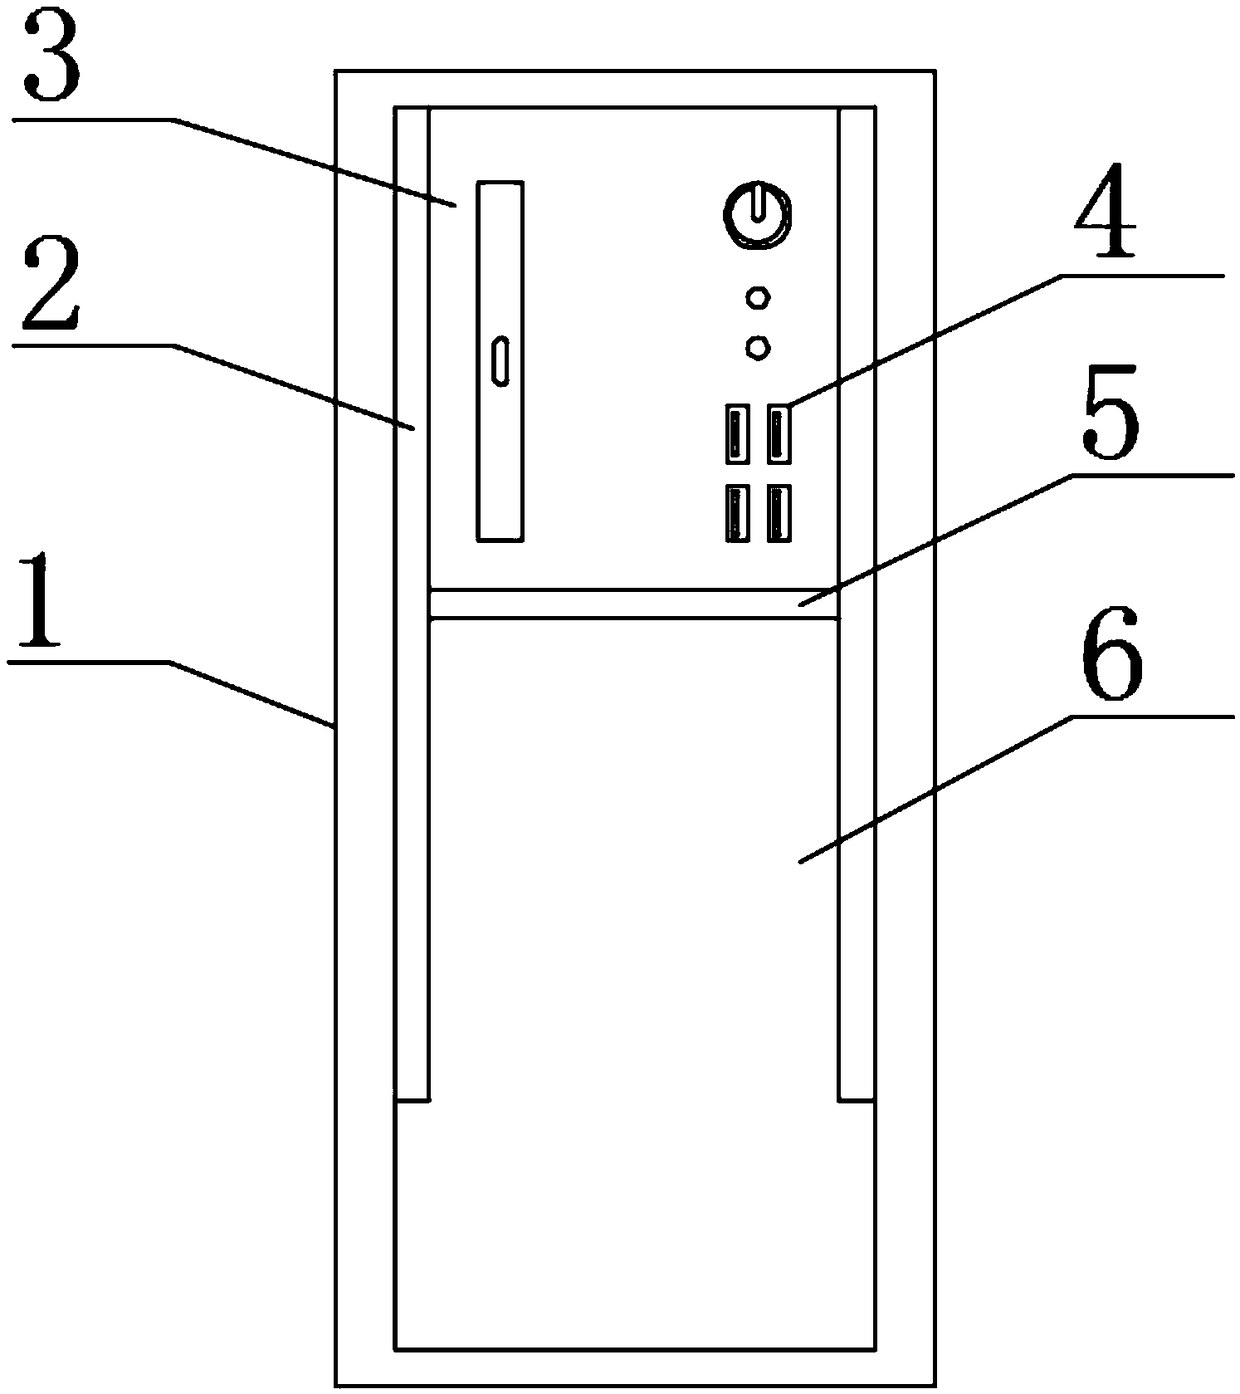 Computer chassis with a control panel concealing function